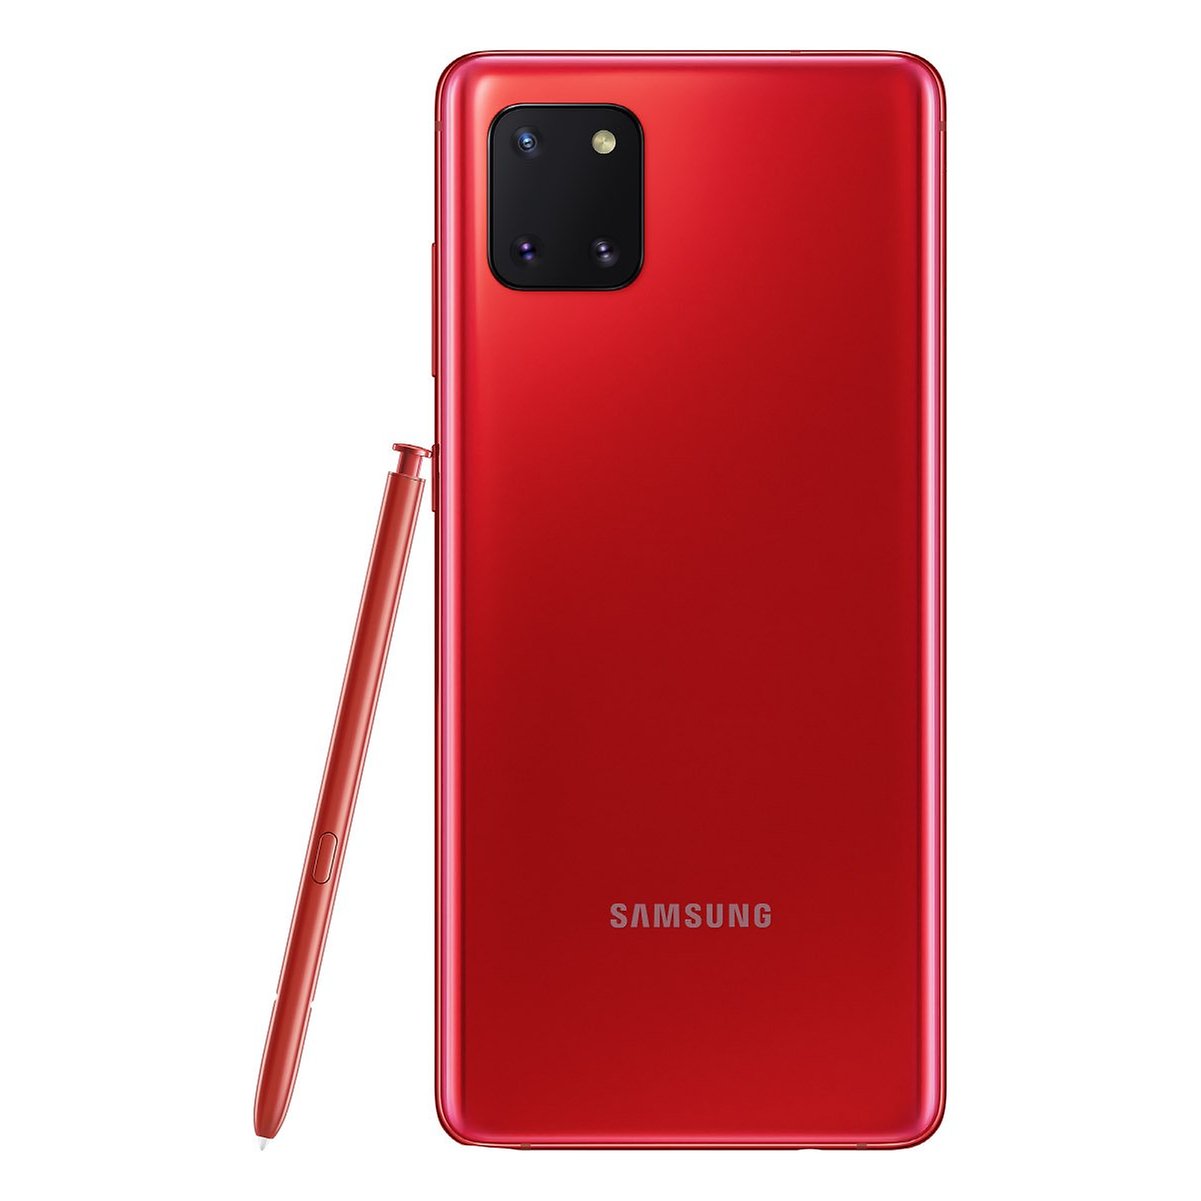 The Samsung Galaxy Note 10 Lite Has Been Officially Presented